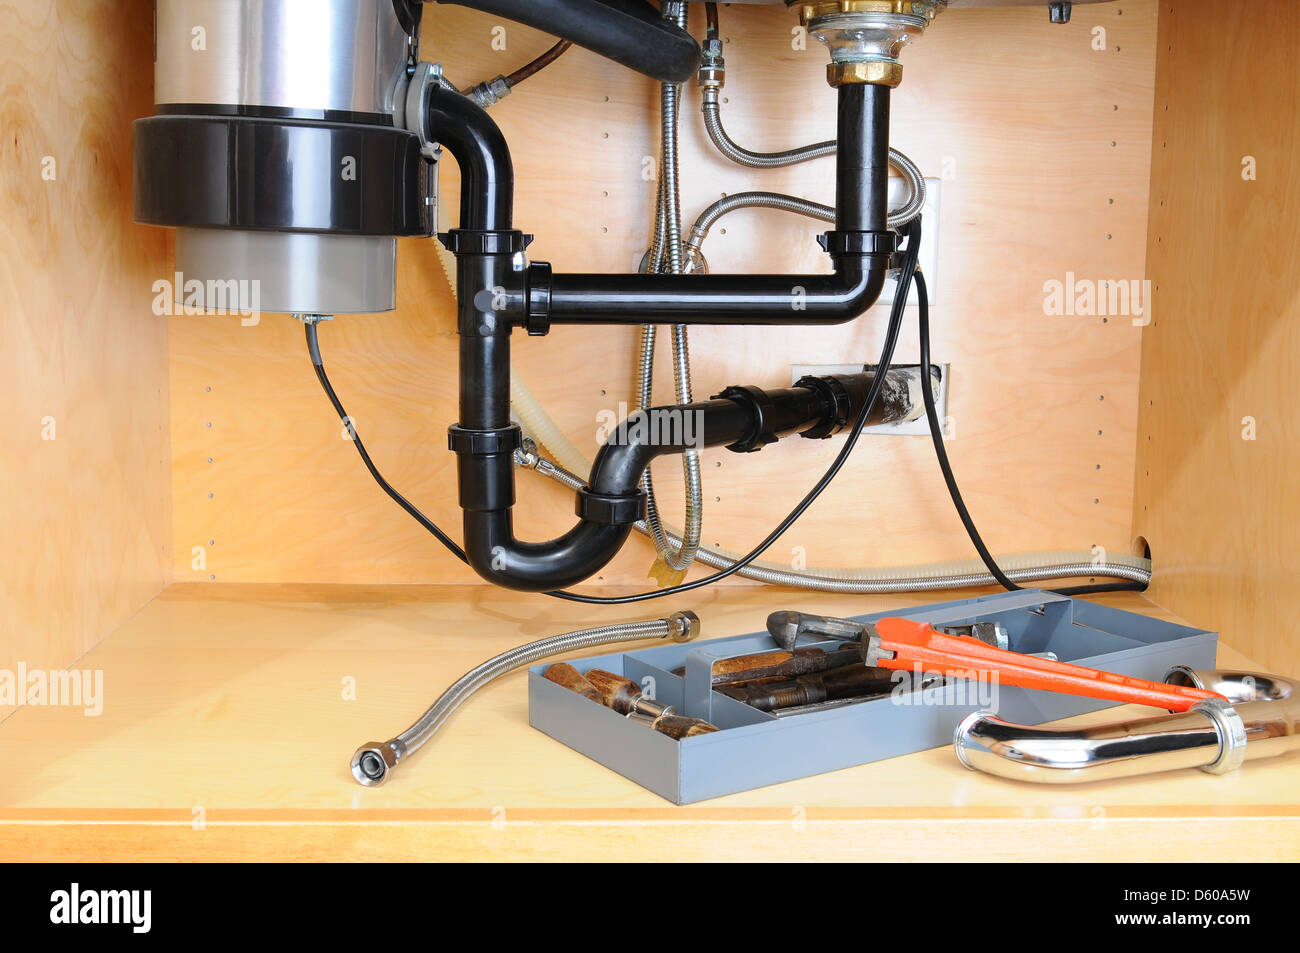 Detail of the plumbing system under a modern kitchen sink, with a plumbers tool tray and equipment. Horizontal format. Stock Photo